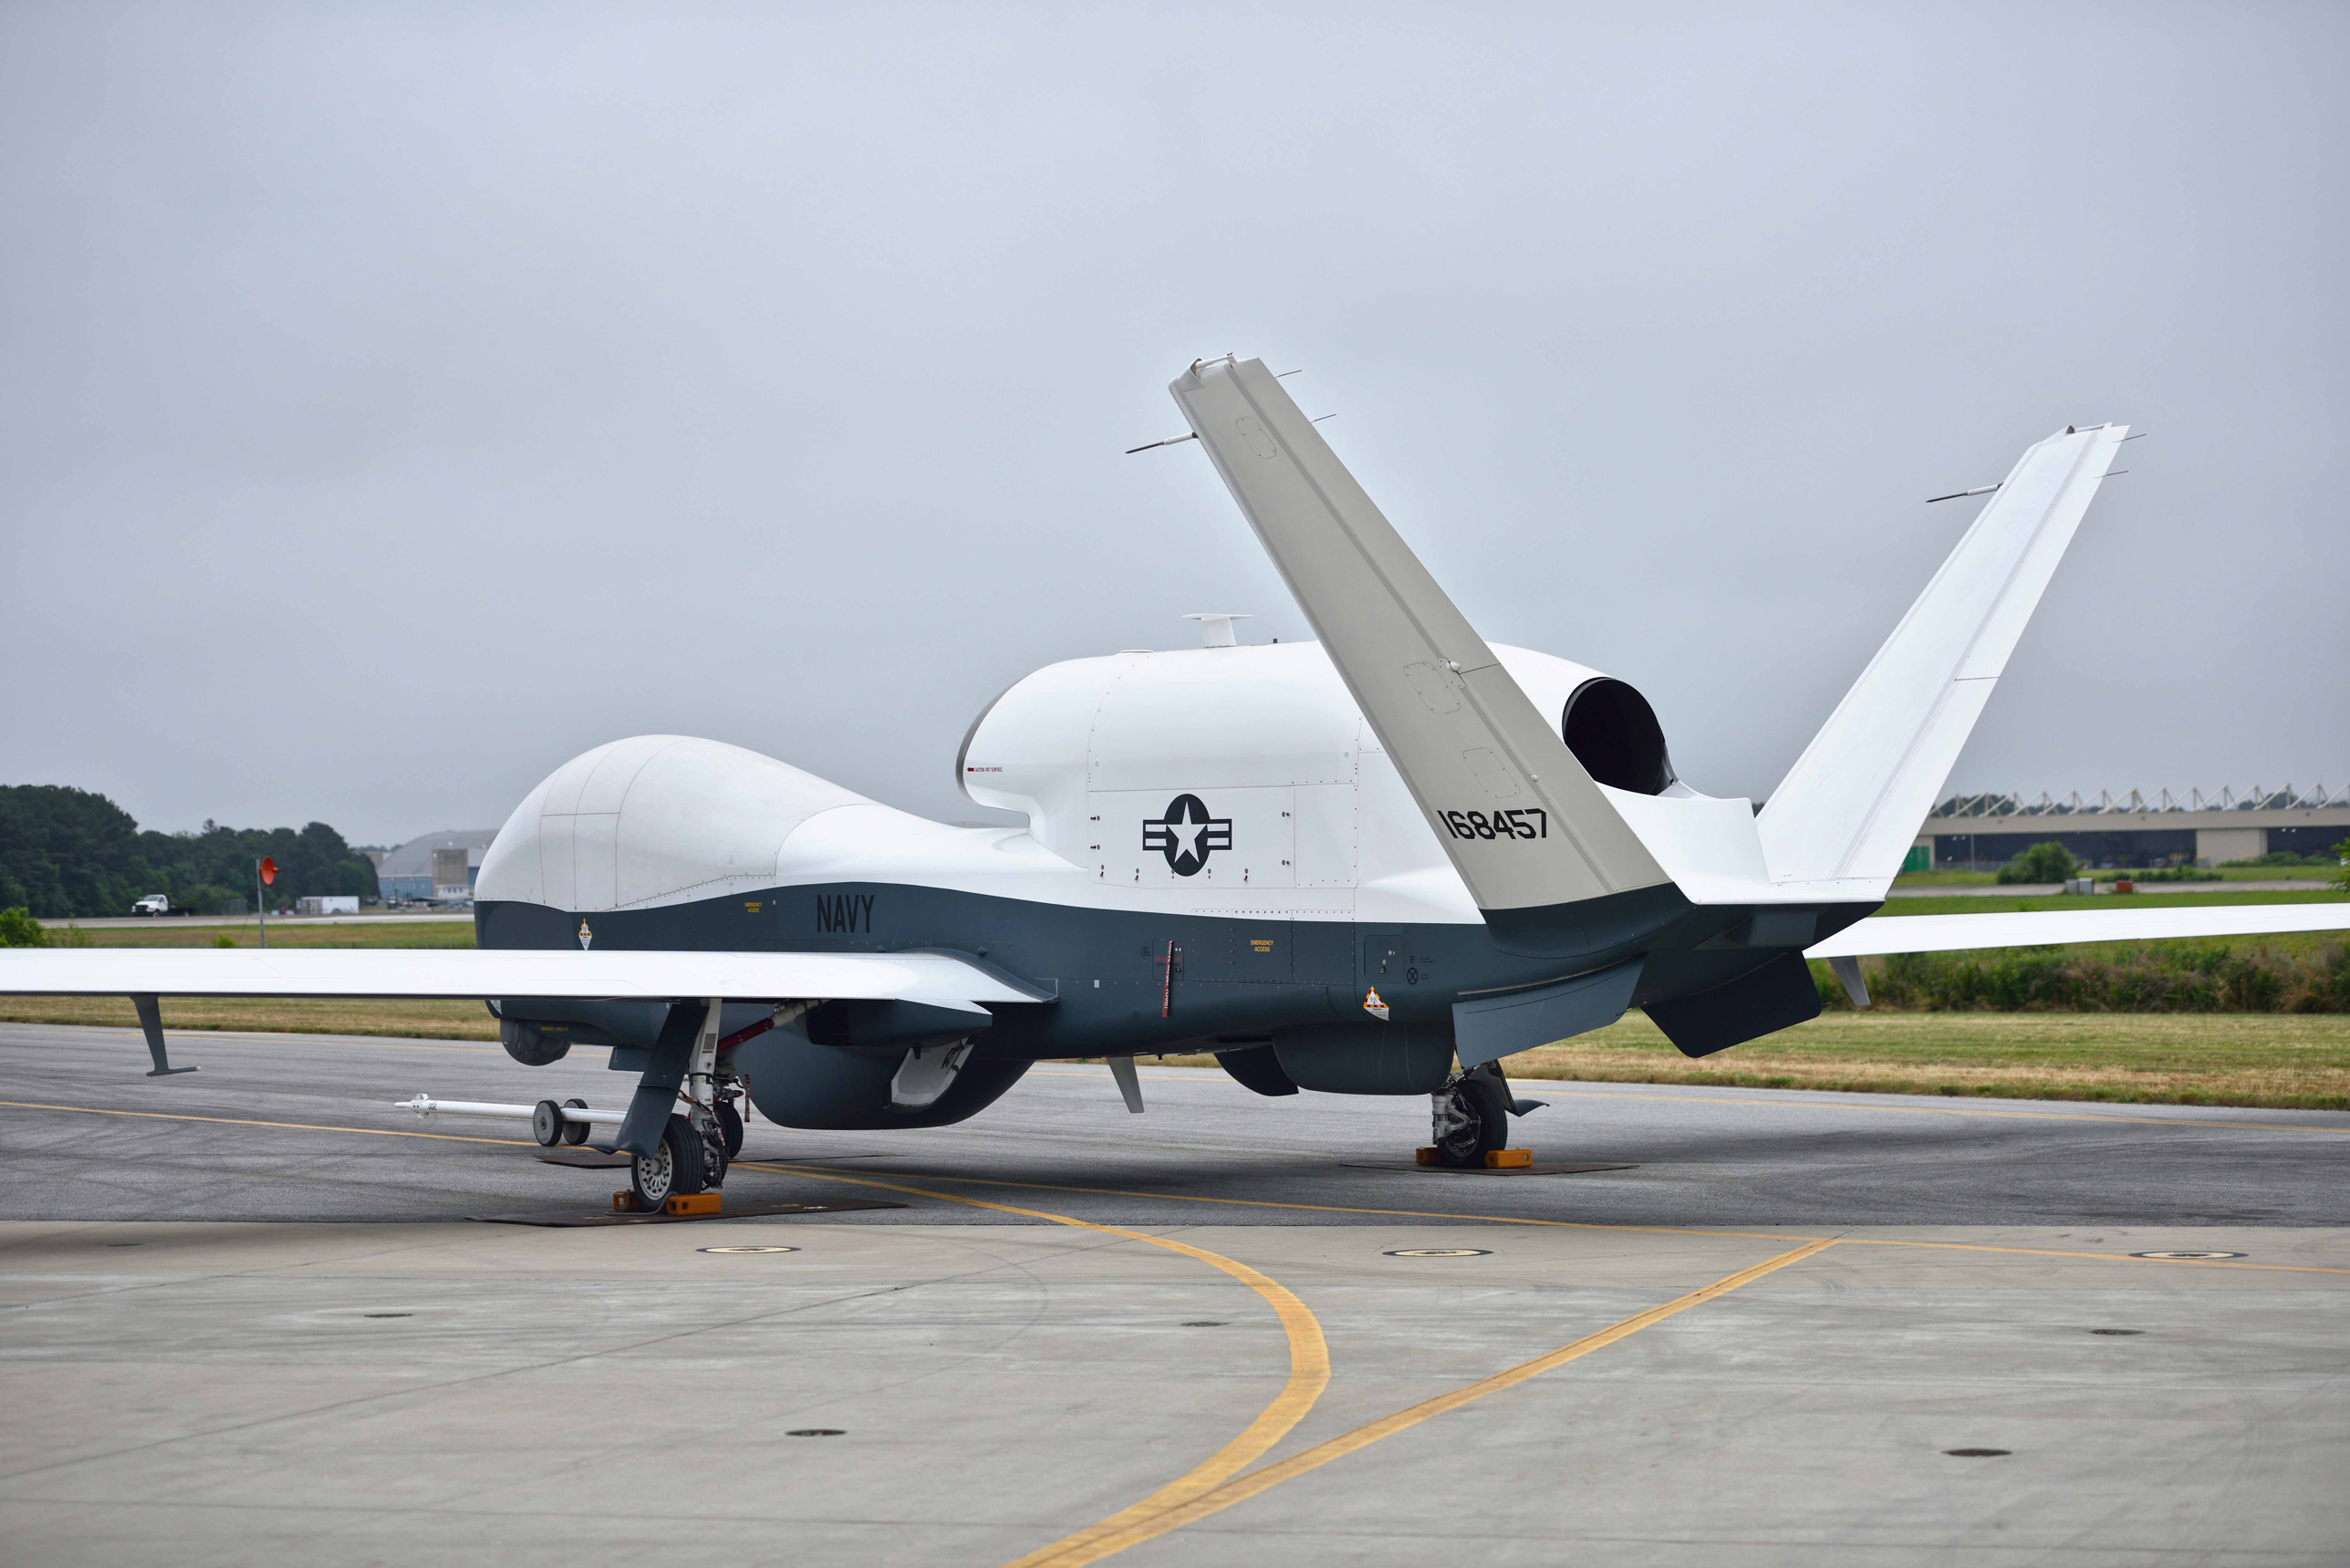 The MQ-4C Triton prepares for a flight test in June 2016 at Naval Air Station Patuxent River, Md. During two recent tests, the unmanned air system completed its first heavy weight flight and demonstrated its ability to communicate with the P-8 aircraft while airborne. US Navy photo.